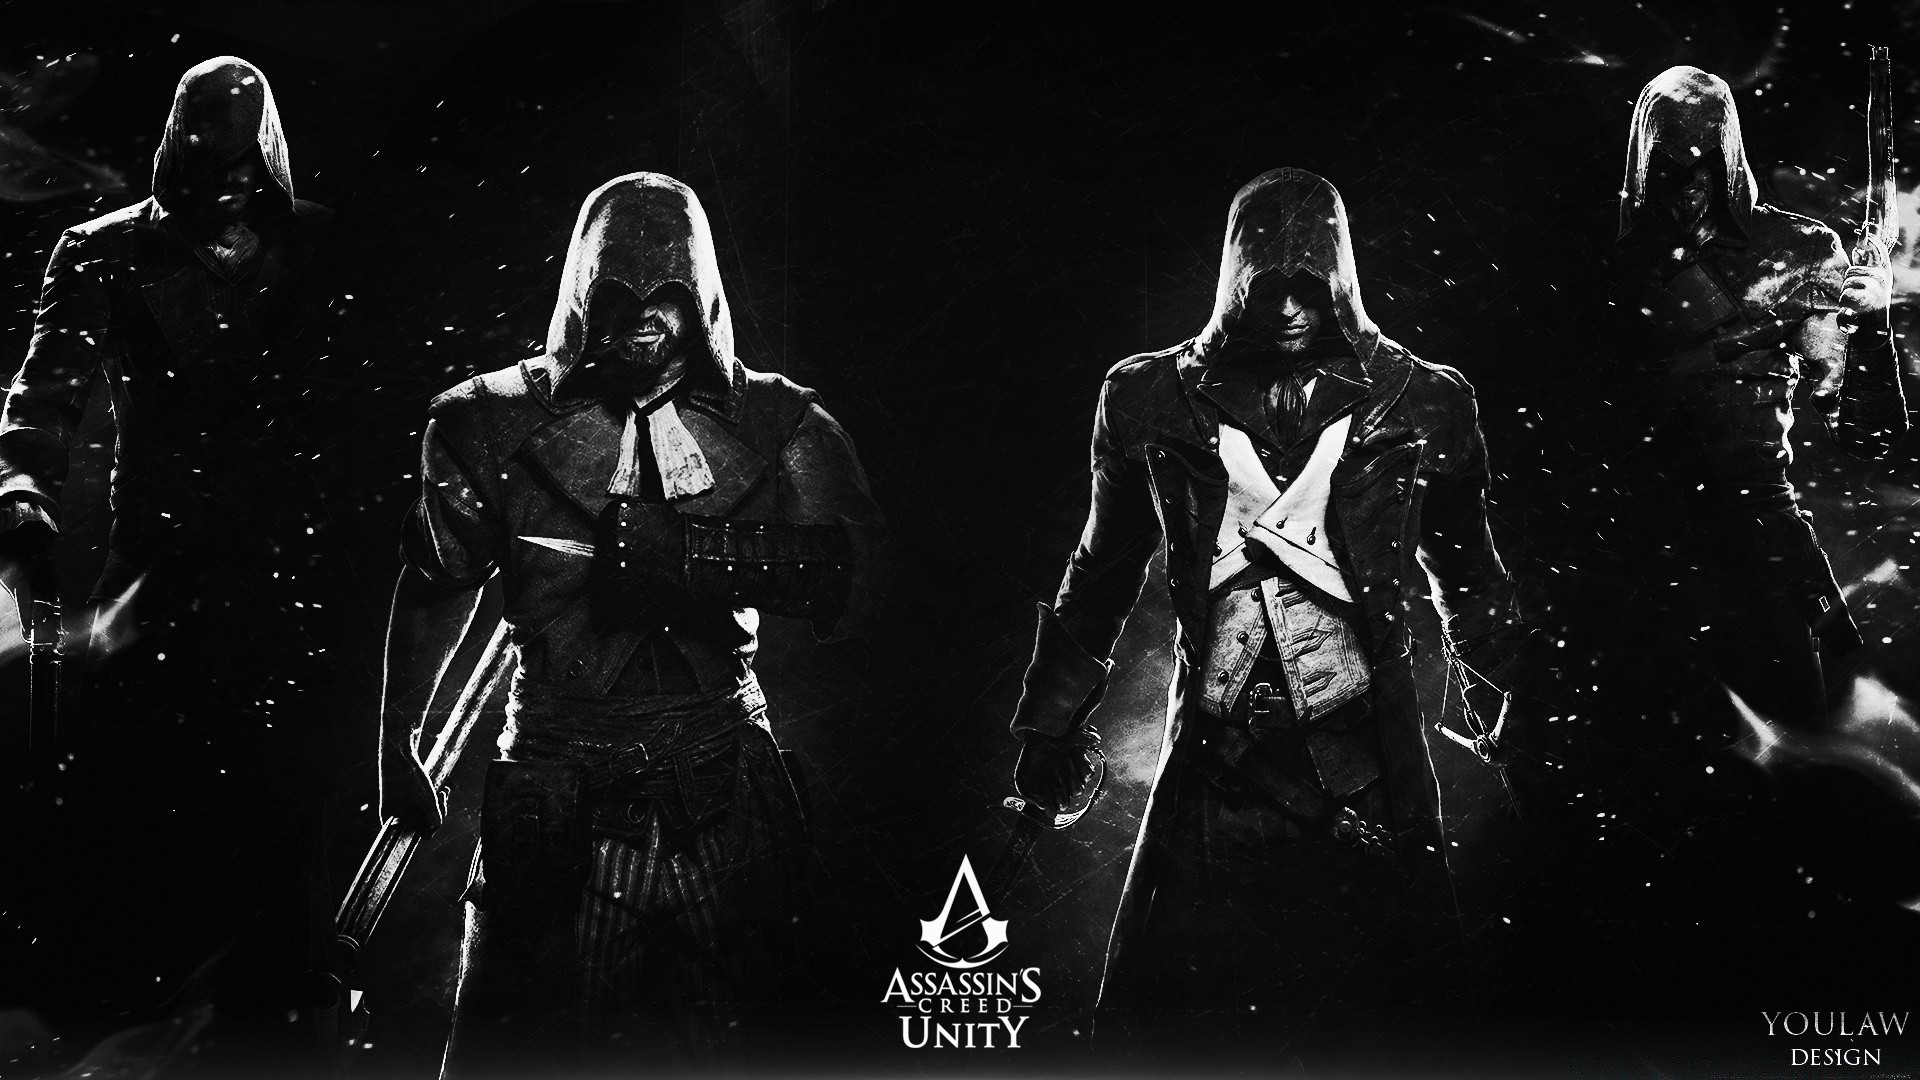 assassin s creed music adult musician singer performance wear one concert man woman outfit group